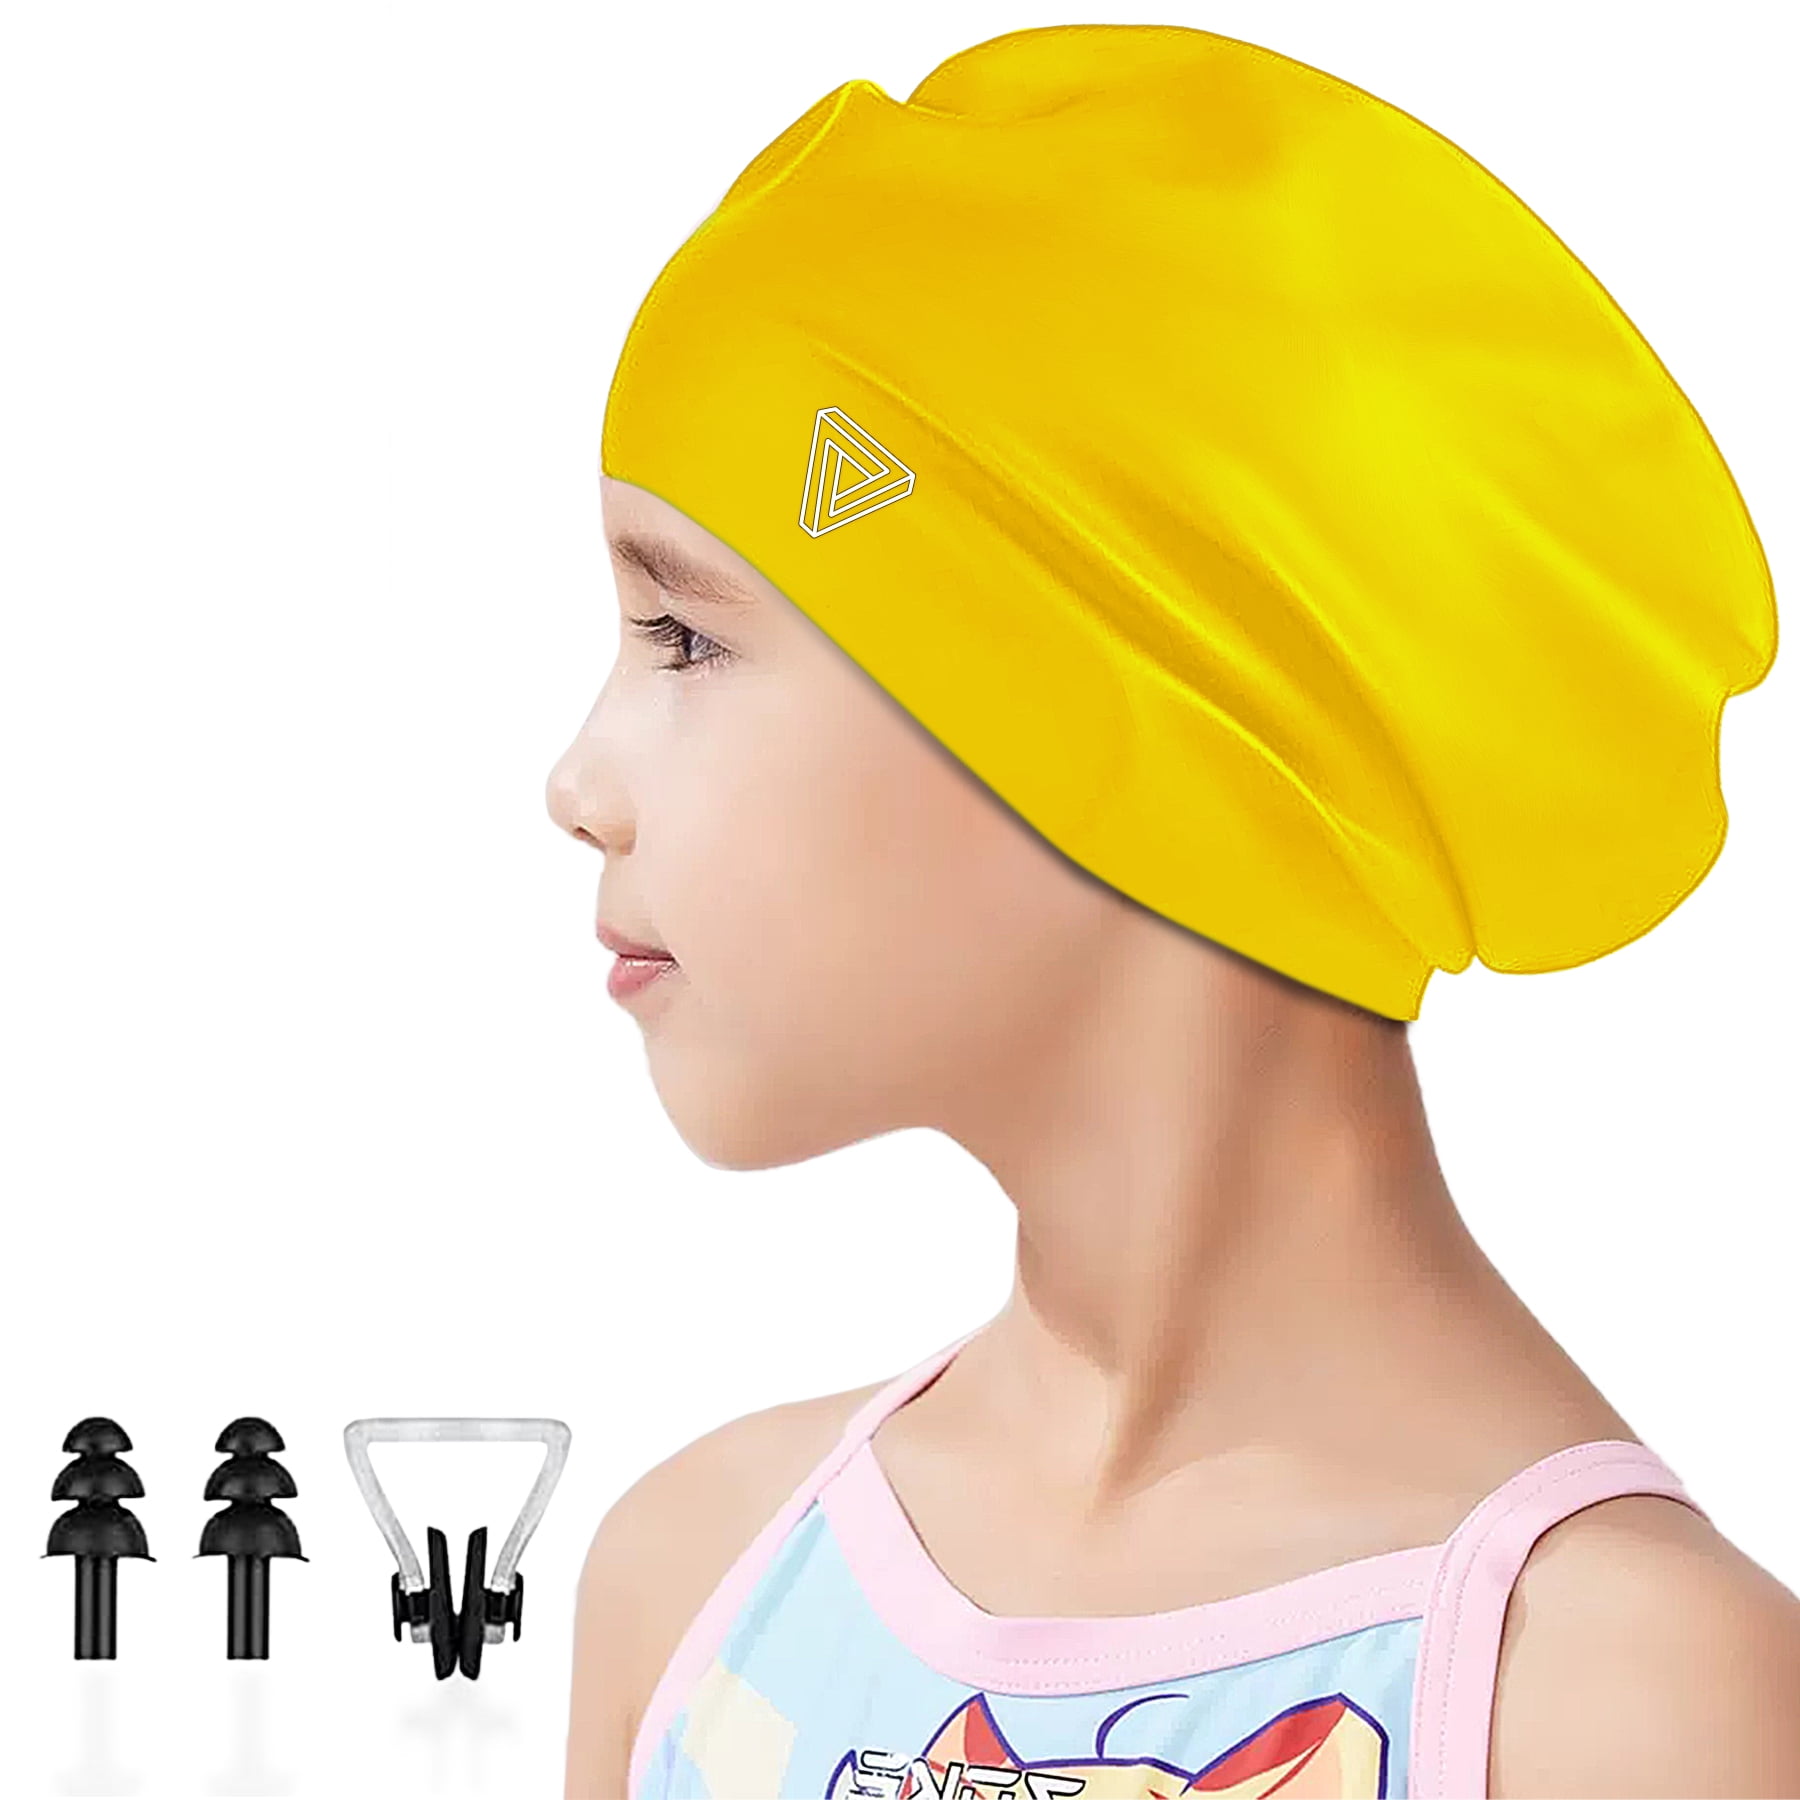  6 Pcs Kids Silicone Swim Cap Summer Swimming Cap Colorful Swim  Cap for Braids and Dreadlocks Soft Waterproof Swim Hat for Boys Girls  Youths Teens Comfortable Fit Short Hair and